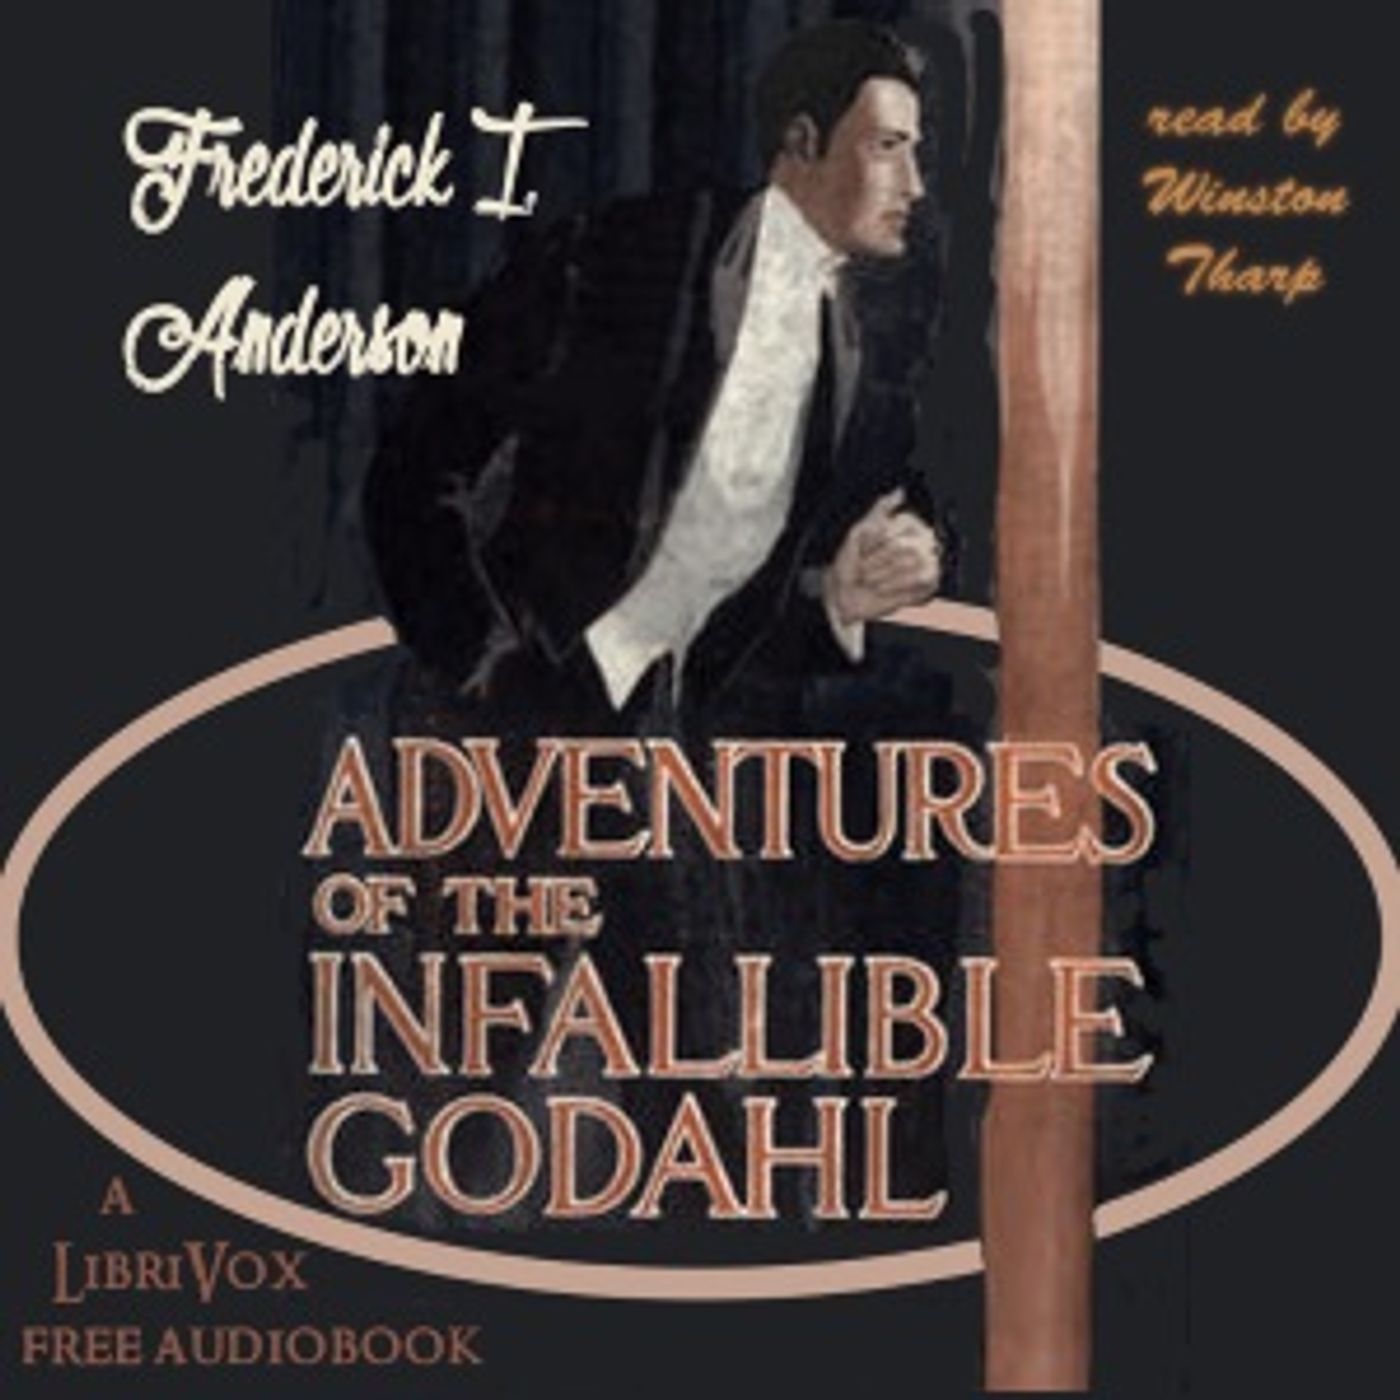 Adventures Of The Infallible Godahl by Frederick Irving Anderson (1877 – 1947)